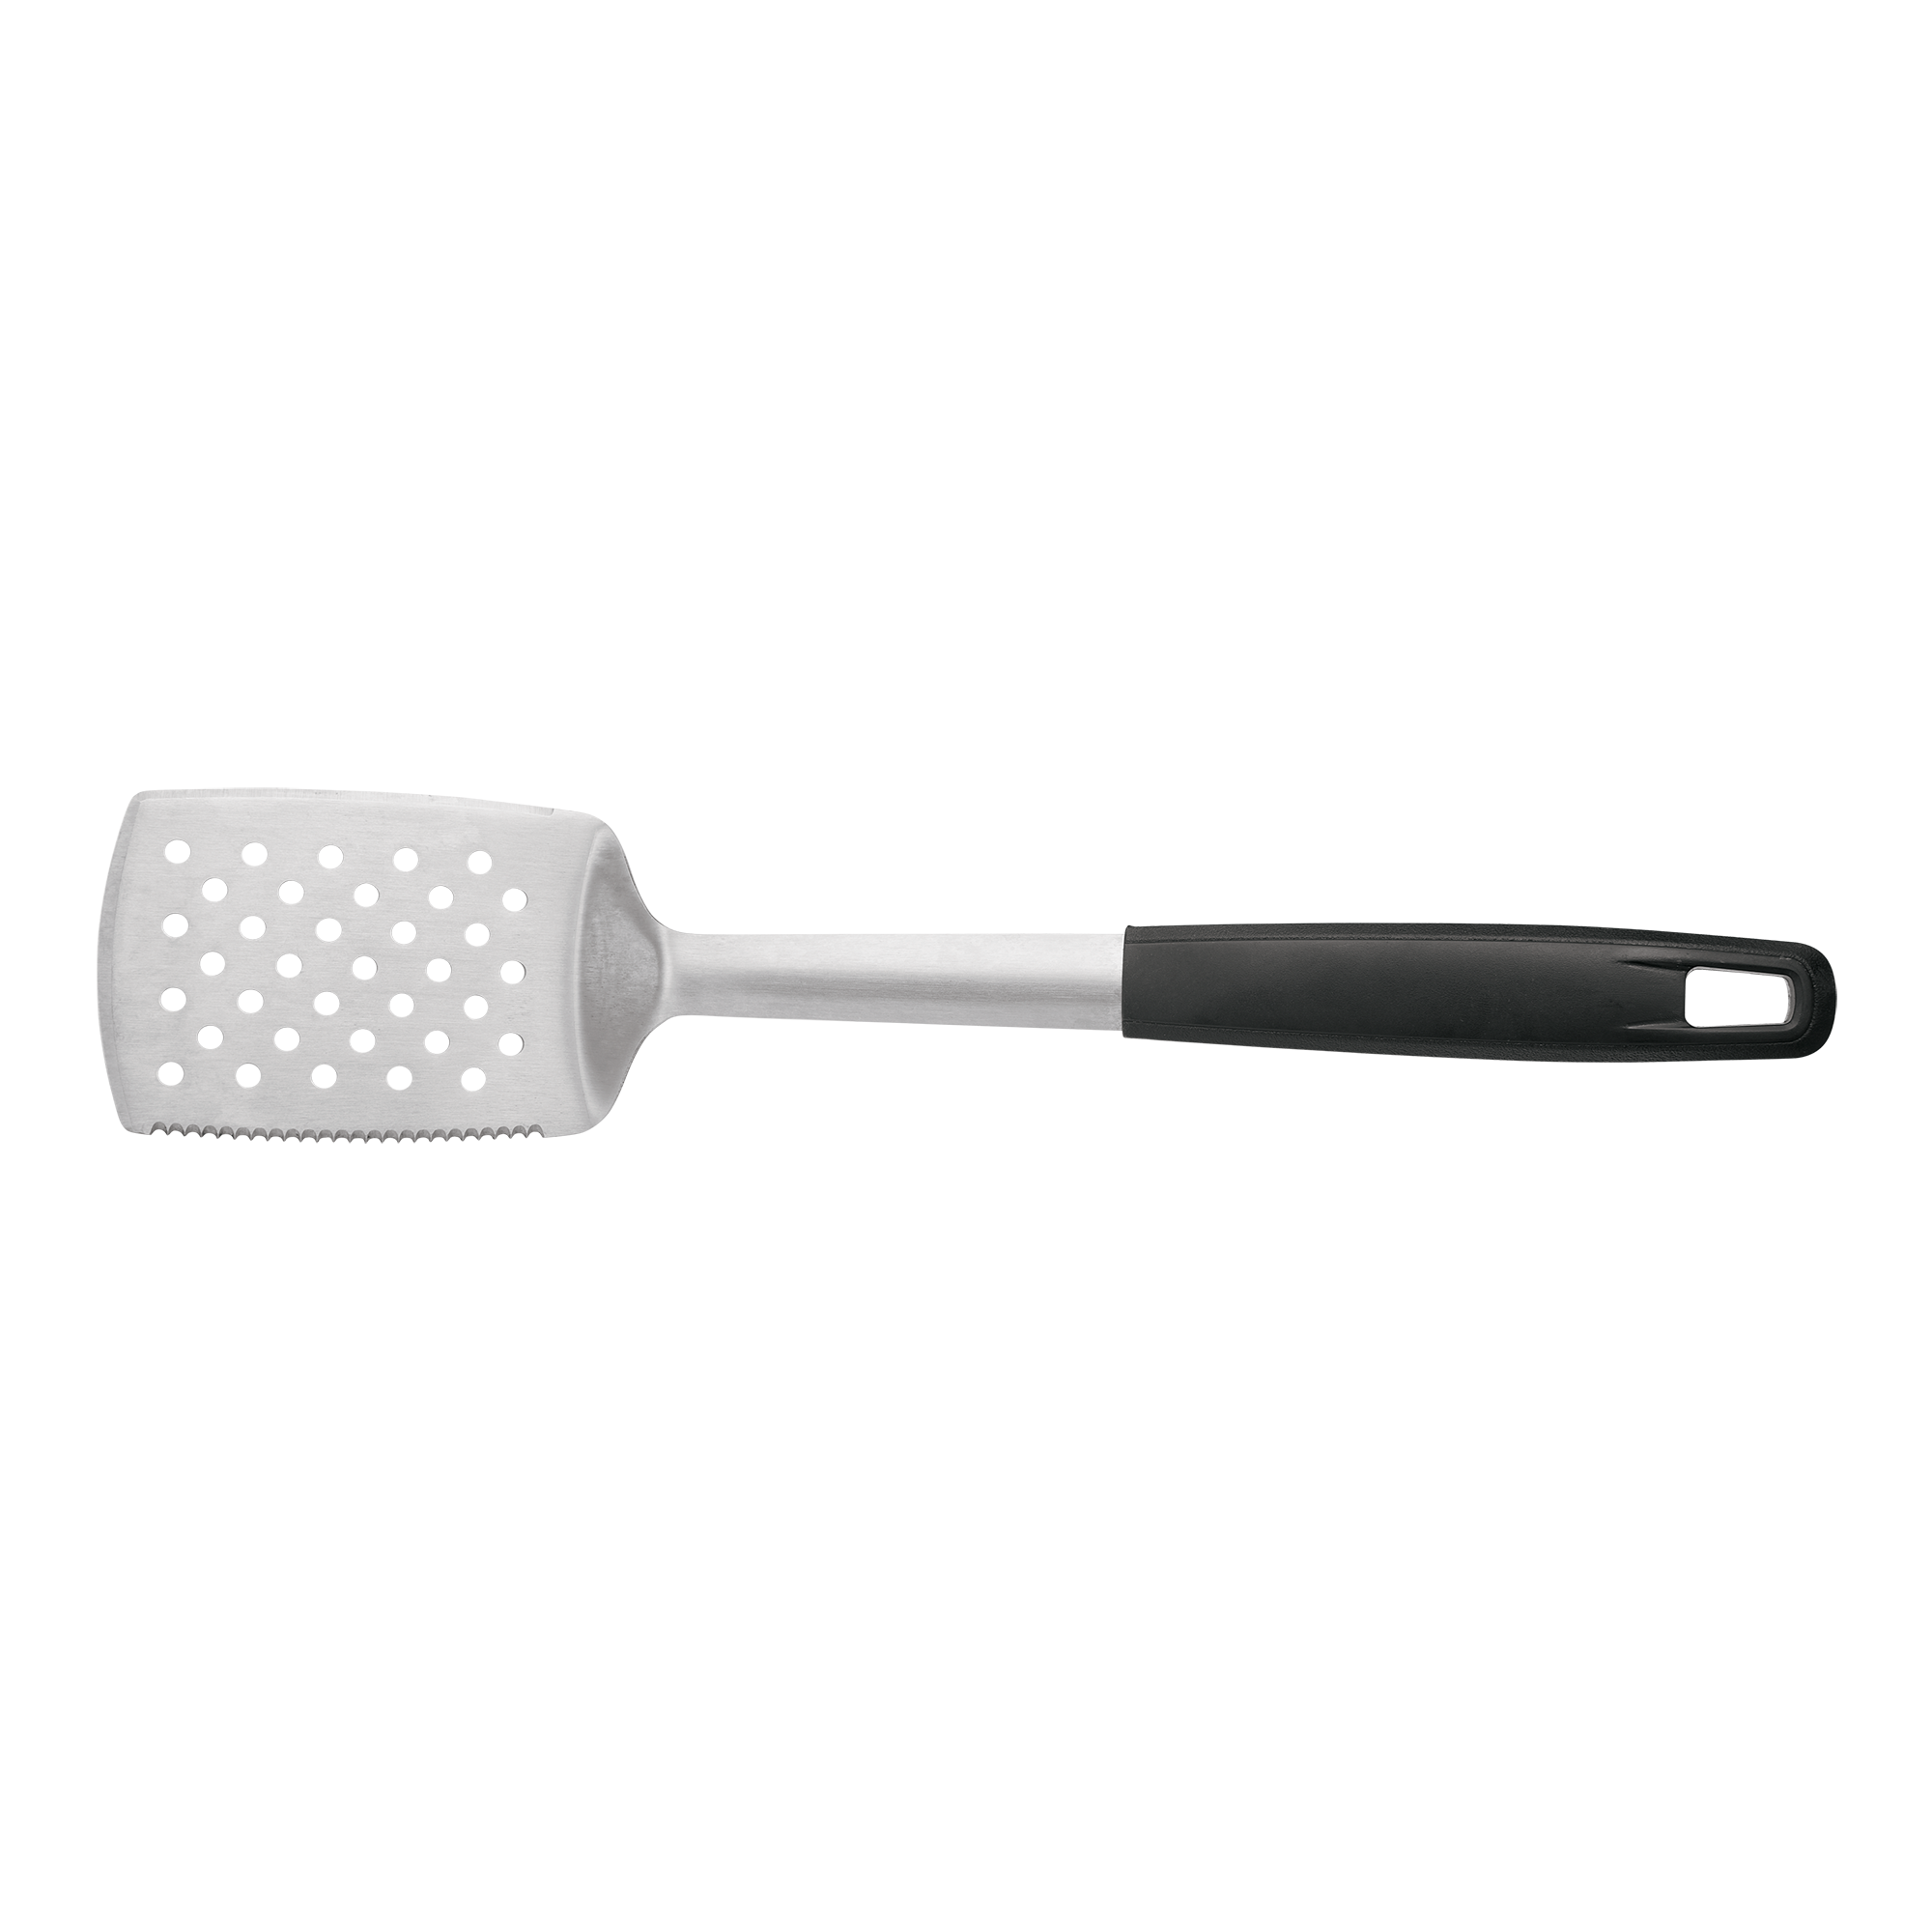 OXO Grilling Turner with Serrated Edge - Stainless Steel Spatula